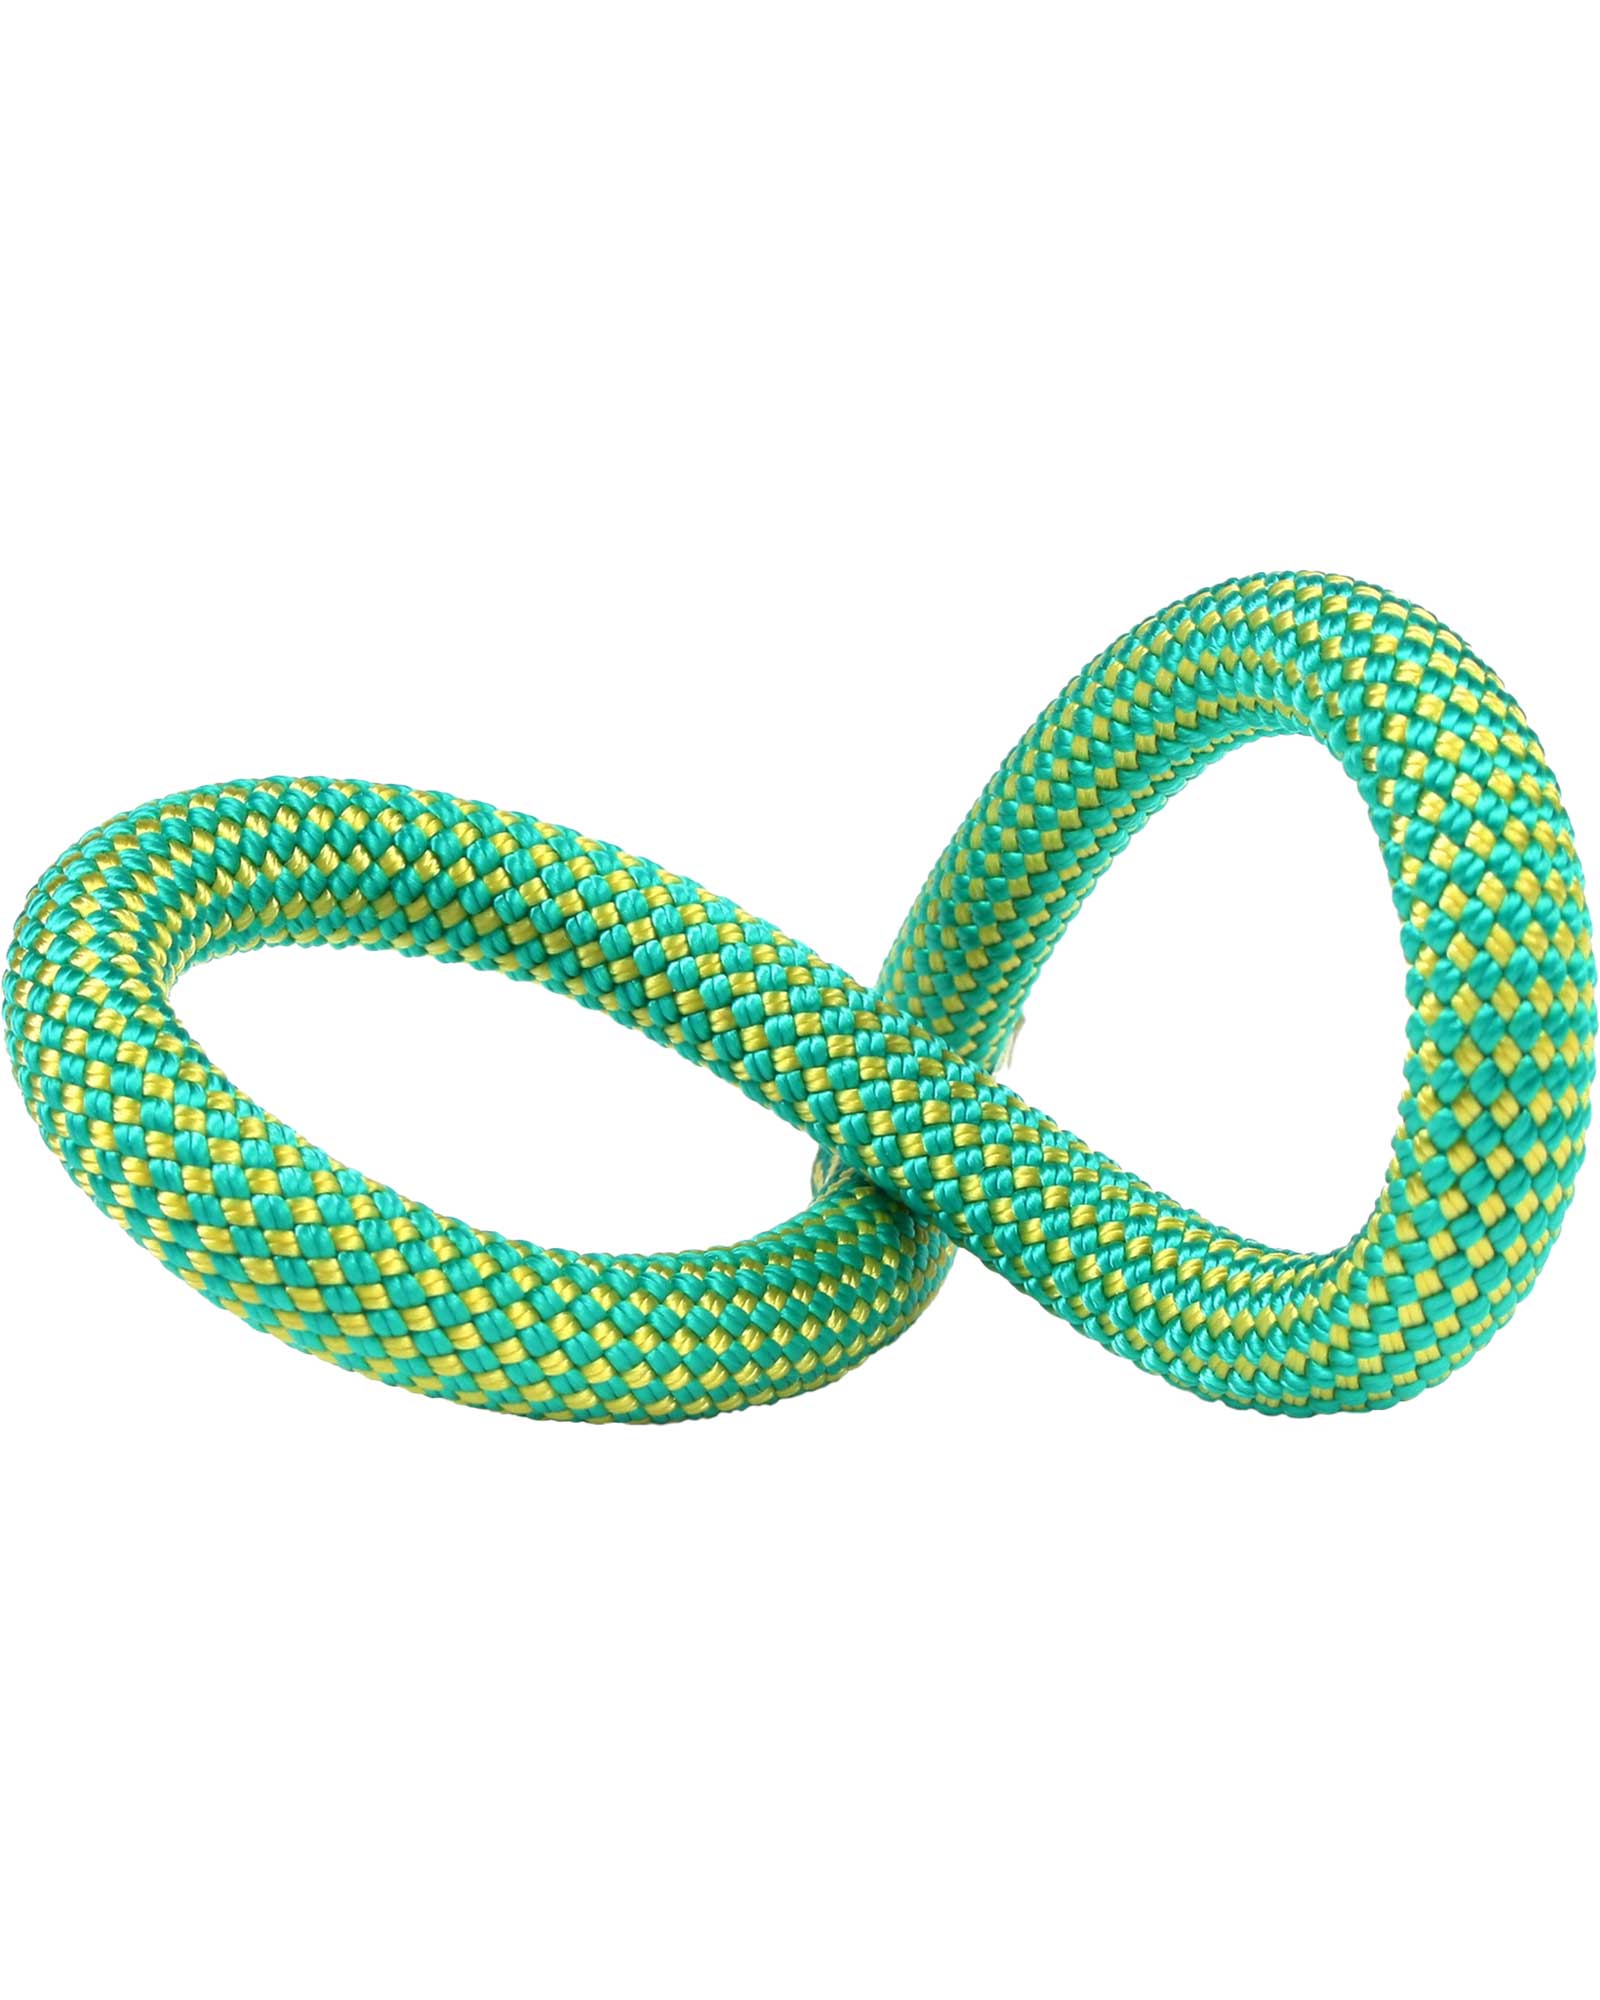 Edelweiss Performance Unicore Supereverdry 9.2mm x 60m Rope - Green 60m